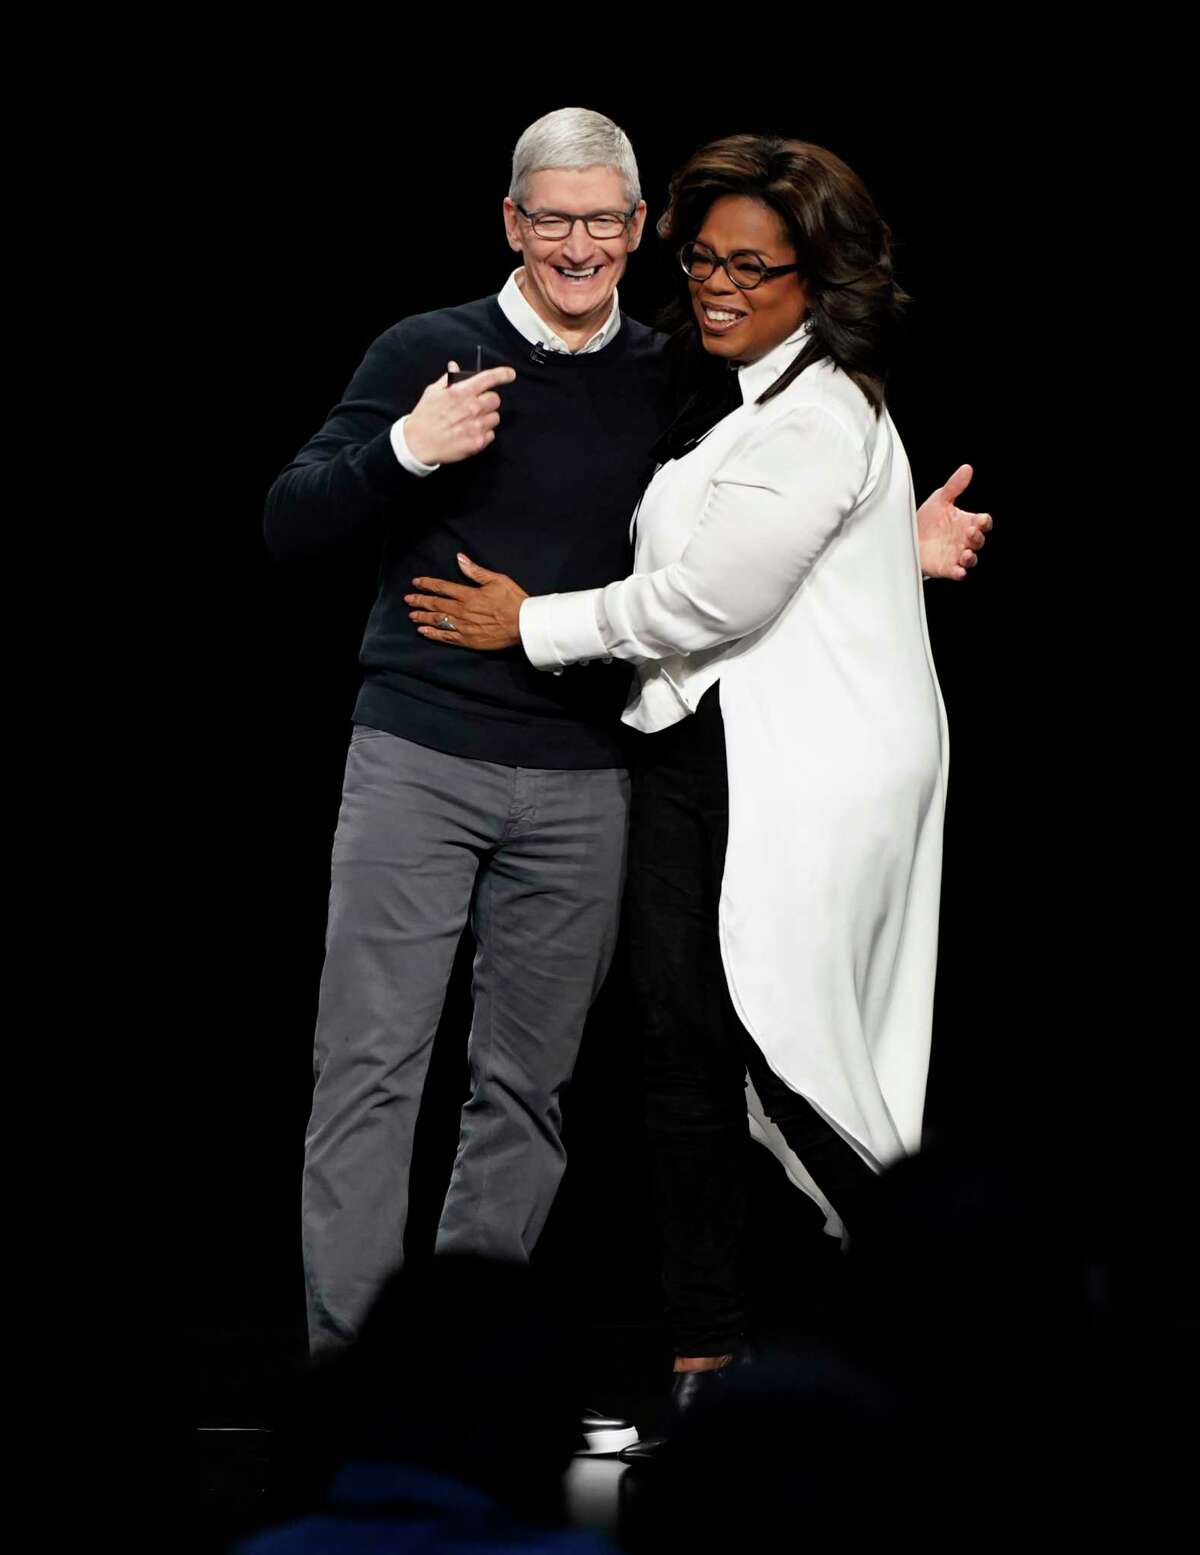 Apple CEO Tim Cook and Oprah Winfrey at the Steve Jobs Theater during an event to announce new products Monday, March 25, 2019, in Cupertino, Calif.